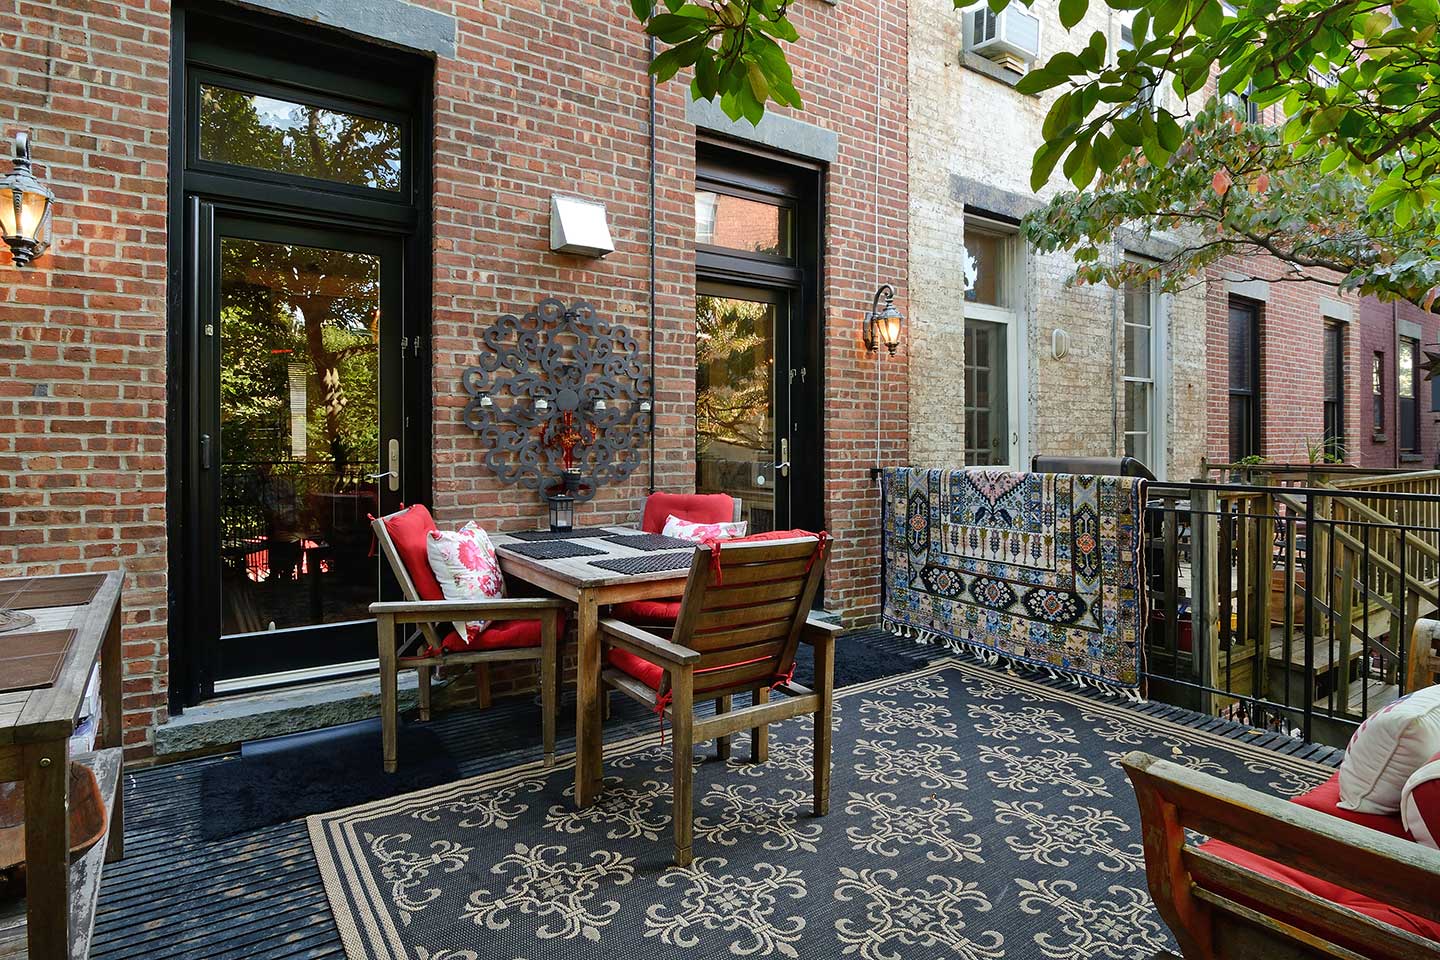 hoboken real estate for sale 1106 bloomfield st patio